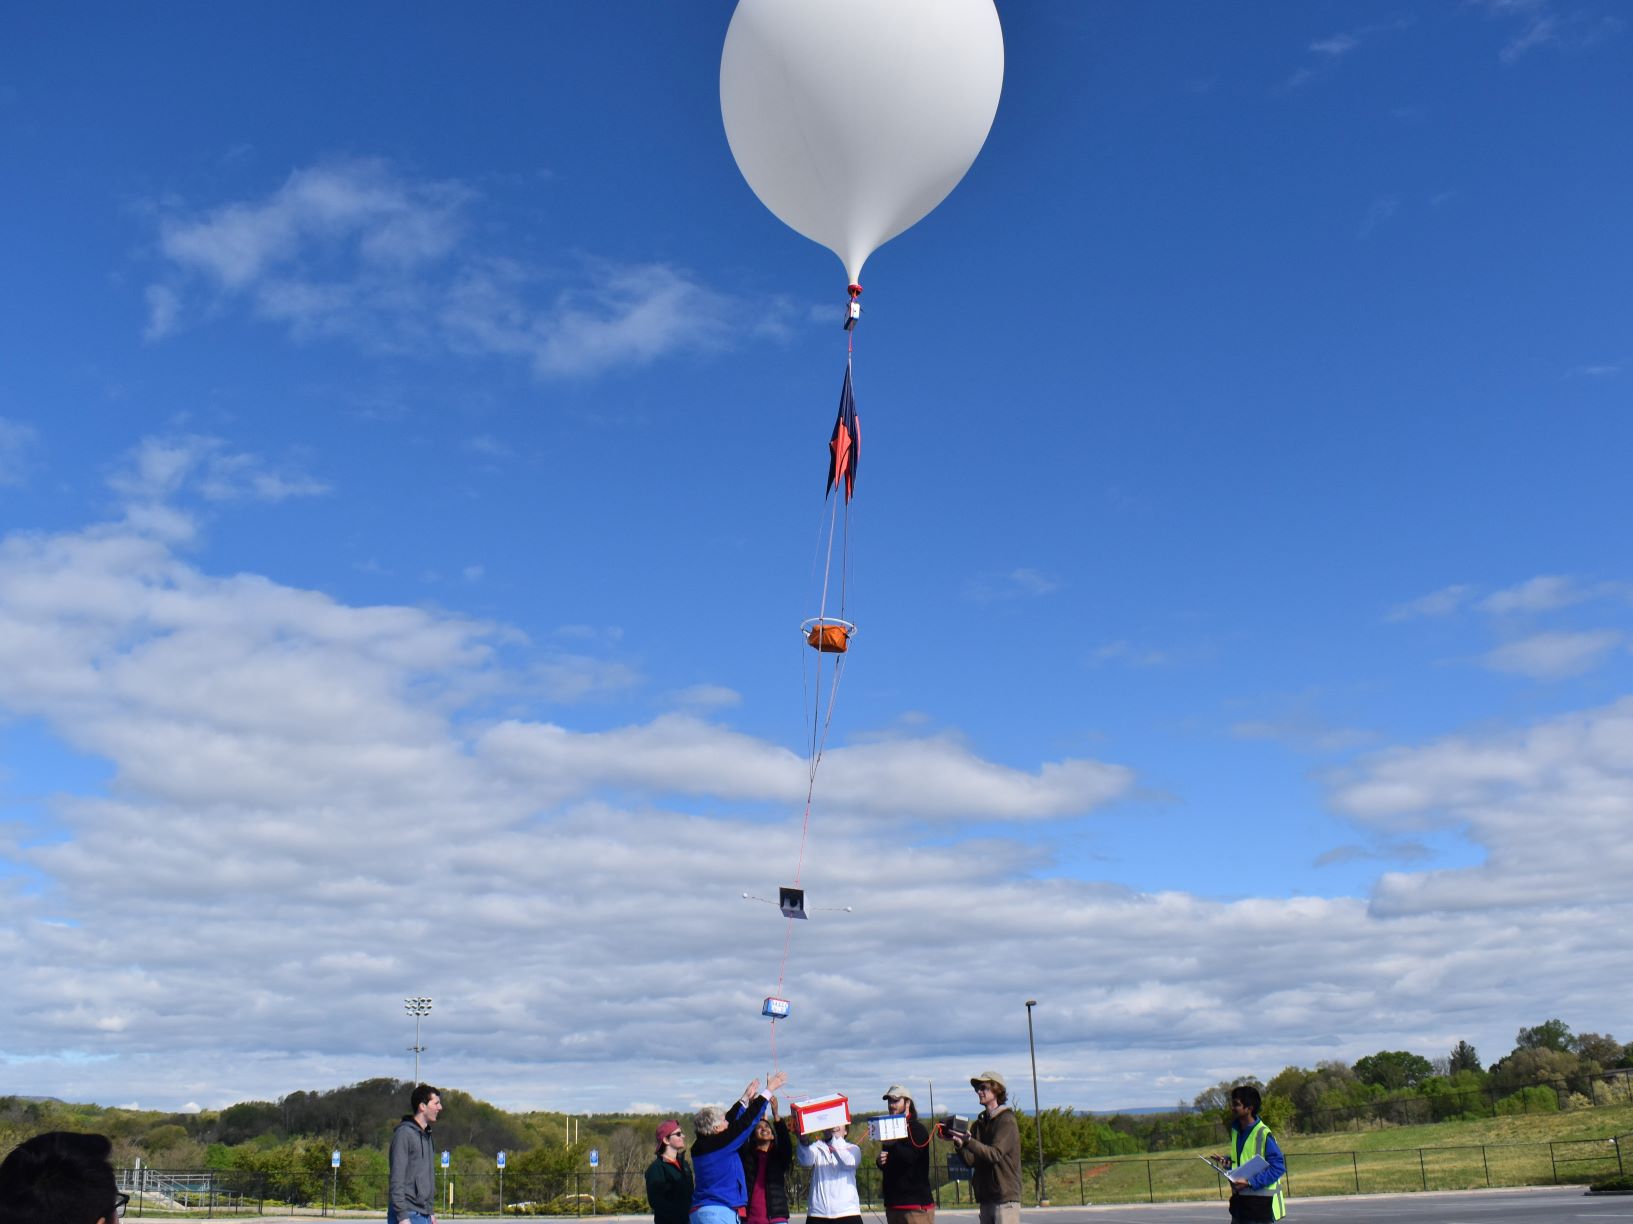 The University of Maryland’s (UMD) Balloon Payload Program (BPP), known as Maryland Nearspace, has conducted more than 120 high-altitude balloon launches since its inception in 2003.